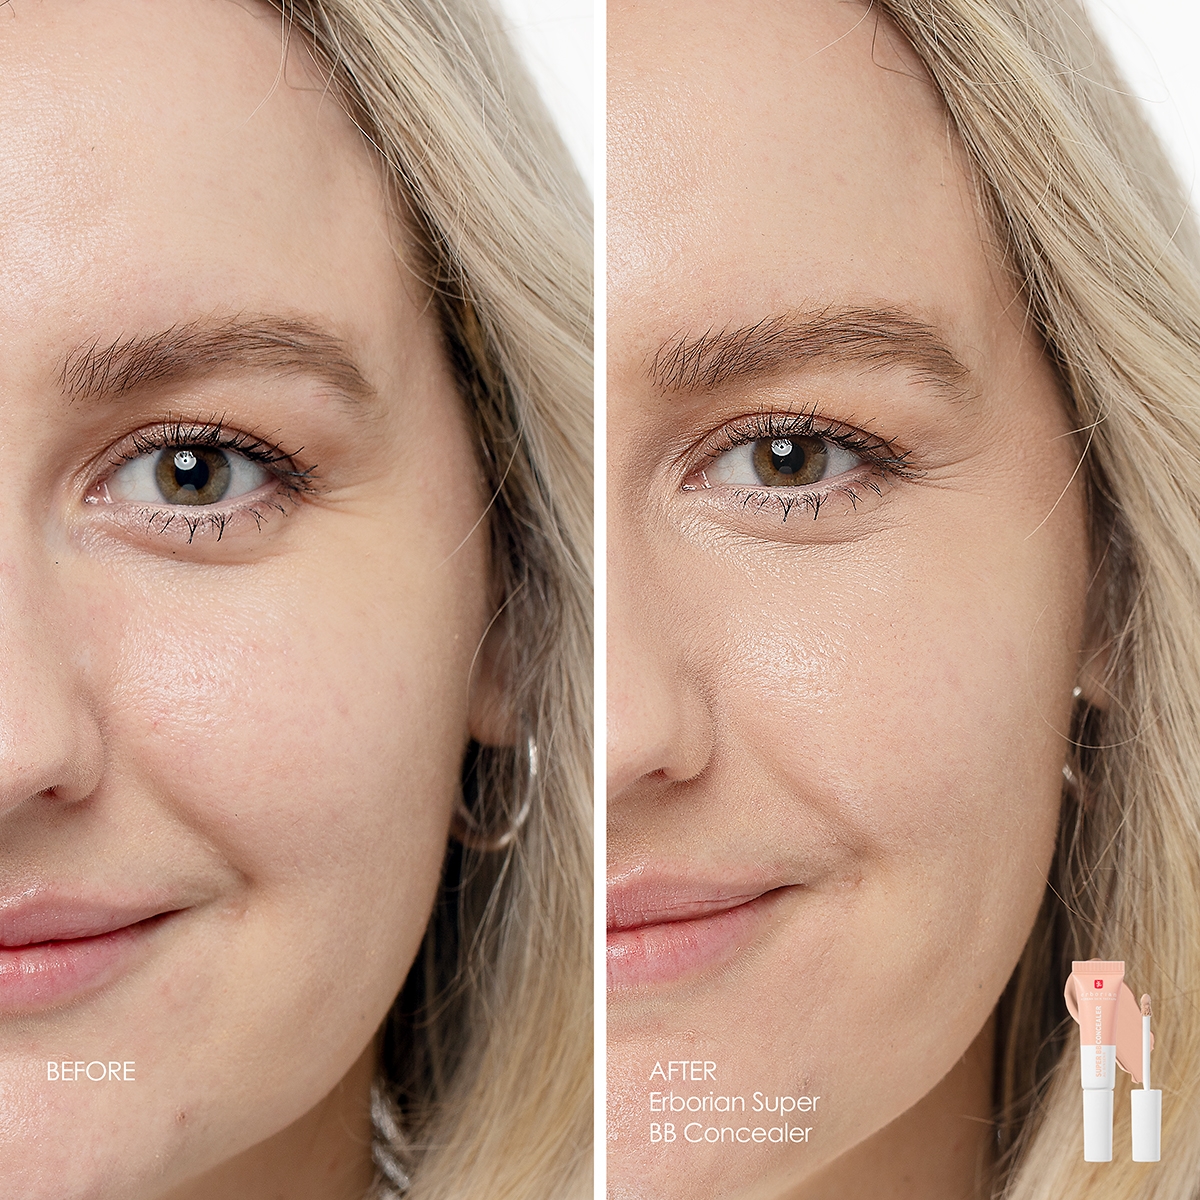 Before and after using Erborian Super BB Concealer in Clair